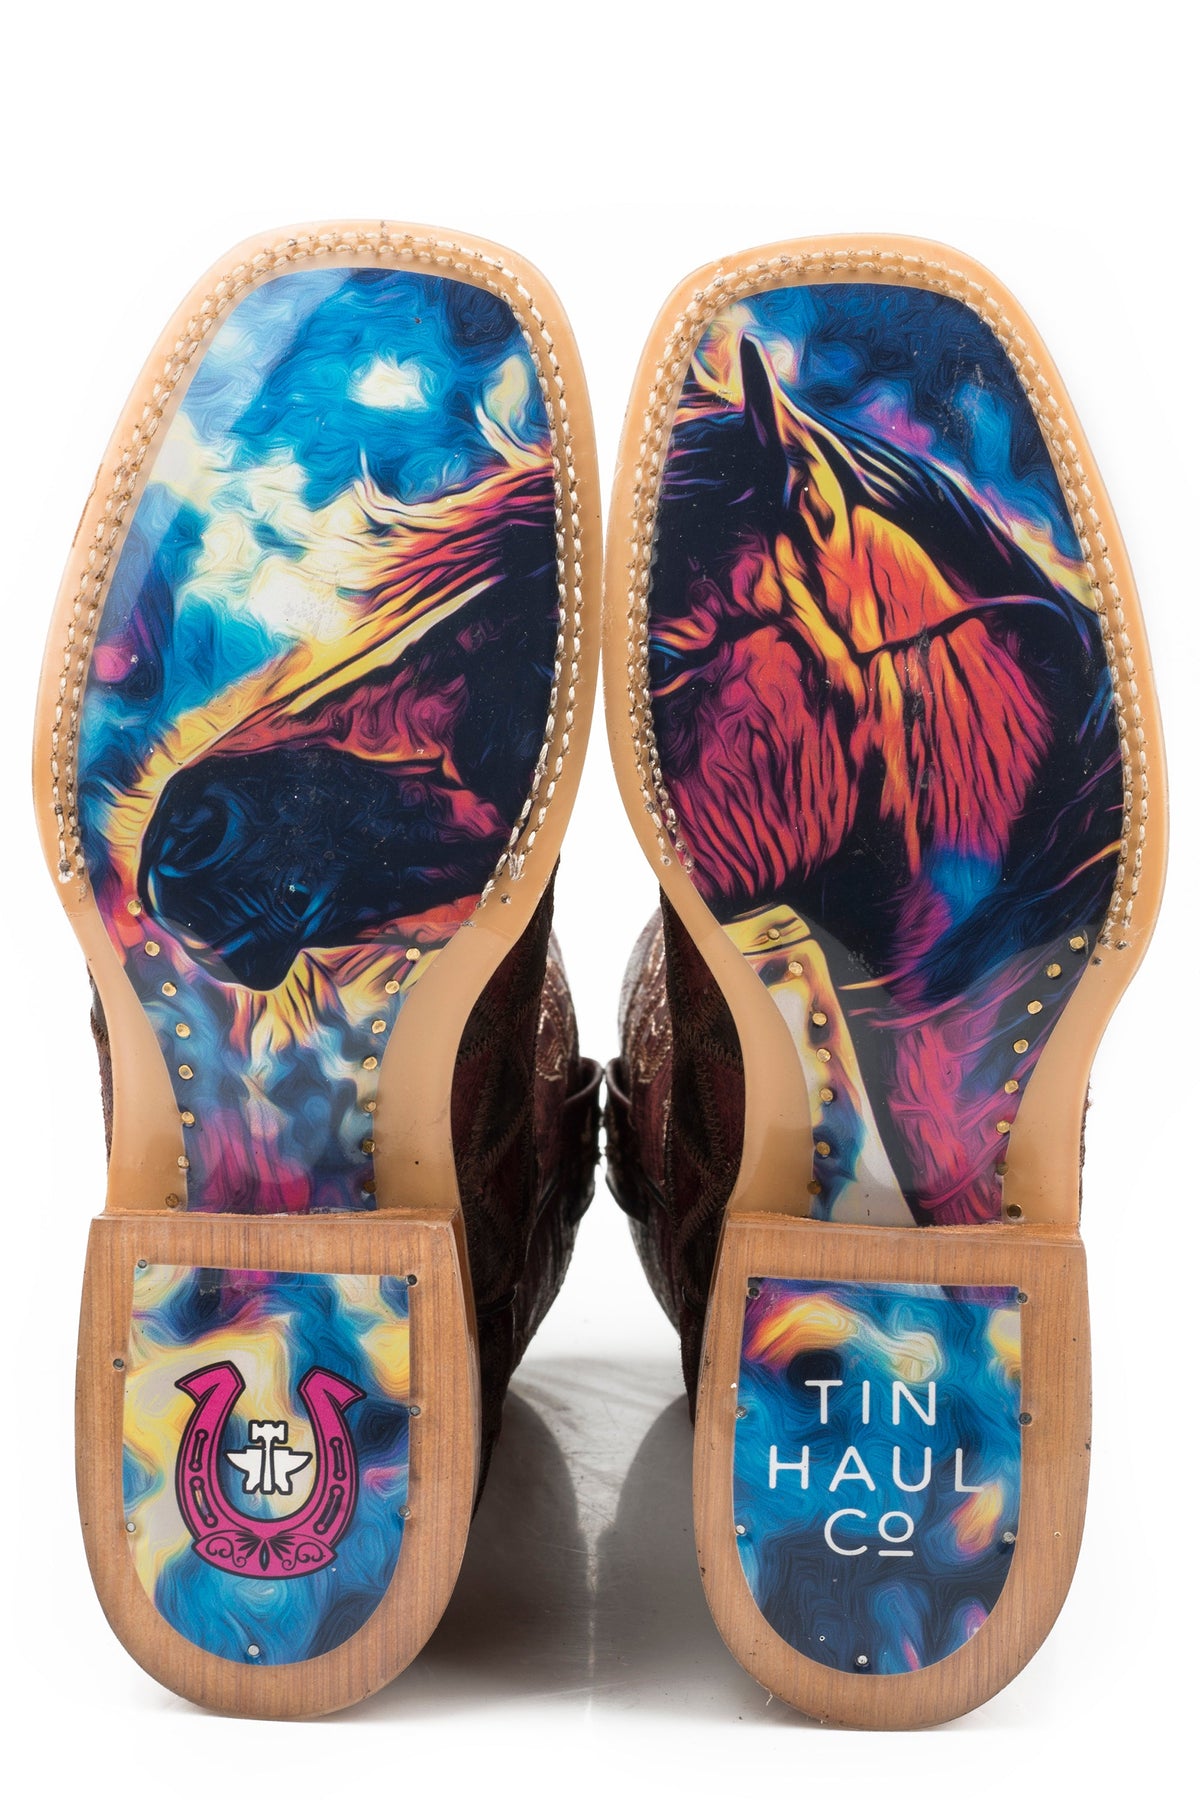 Tin Haul WOMENS A CUTE ANGLE WITH COLORFUL HORSE SOLE